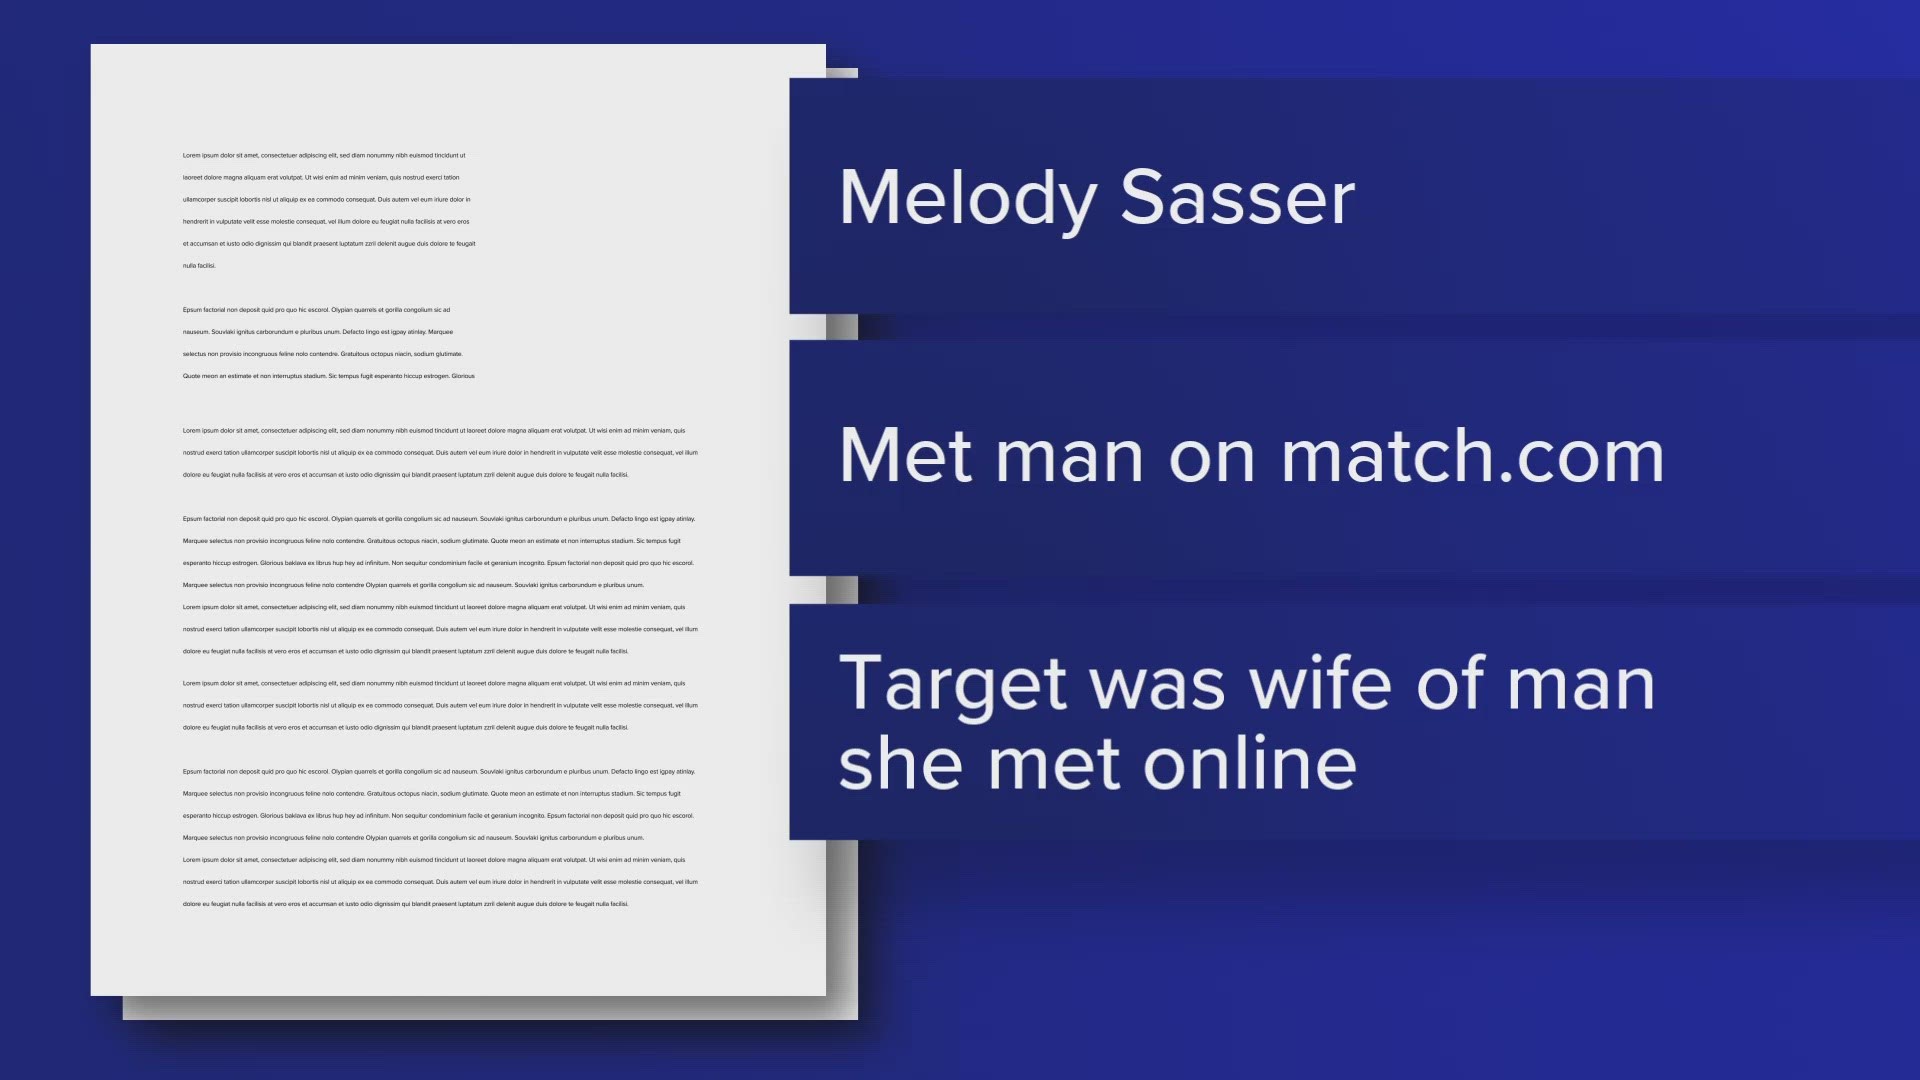 According to court documents, Melody Sasser tried to have the man's wife killed by hiring a hitman on a "dark web" website.